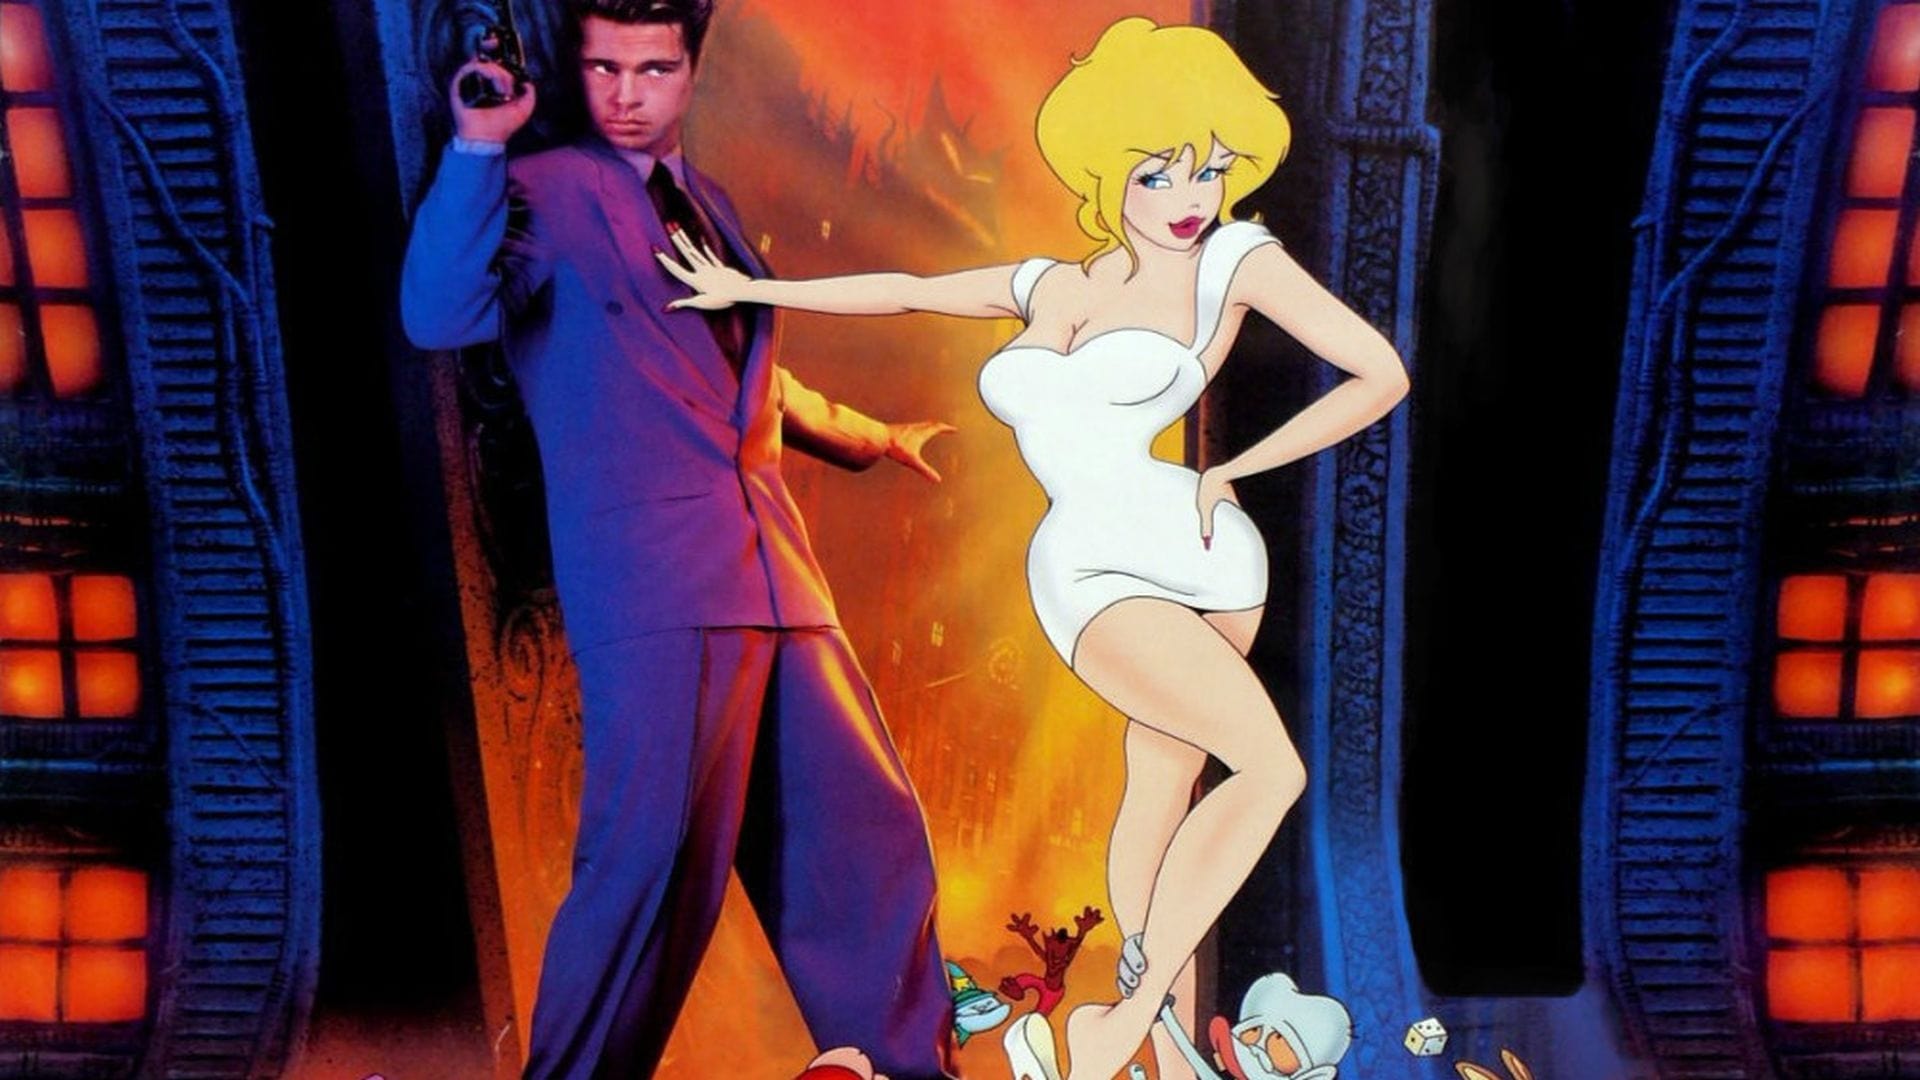 Cool World 1992 Soap2Day